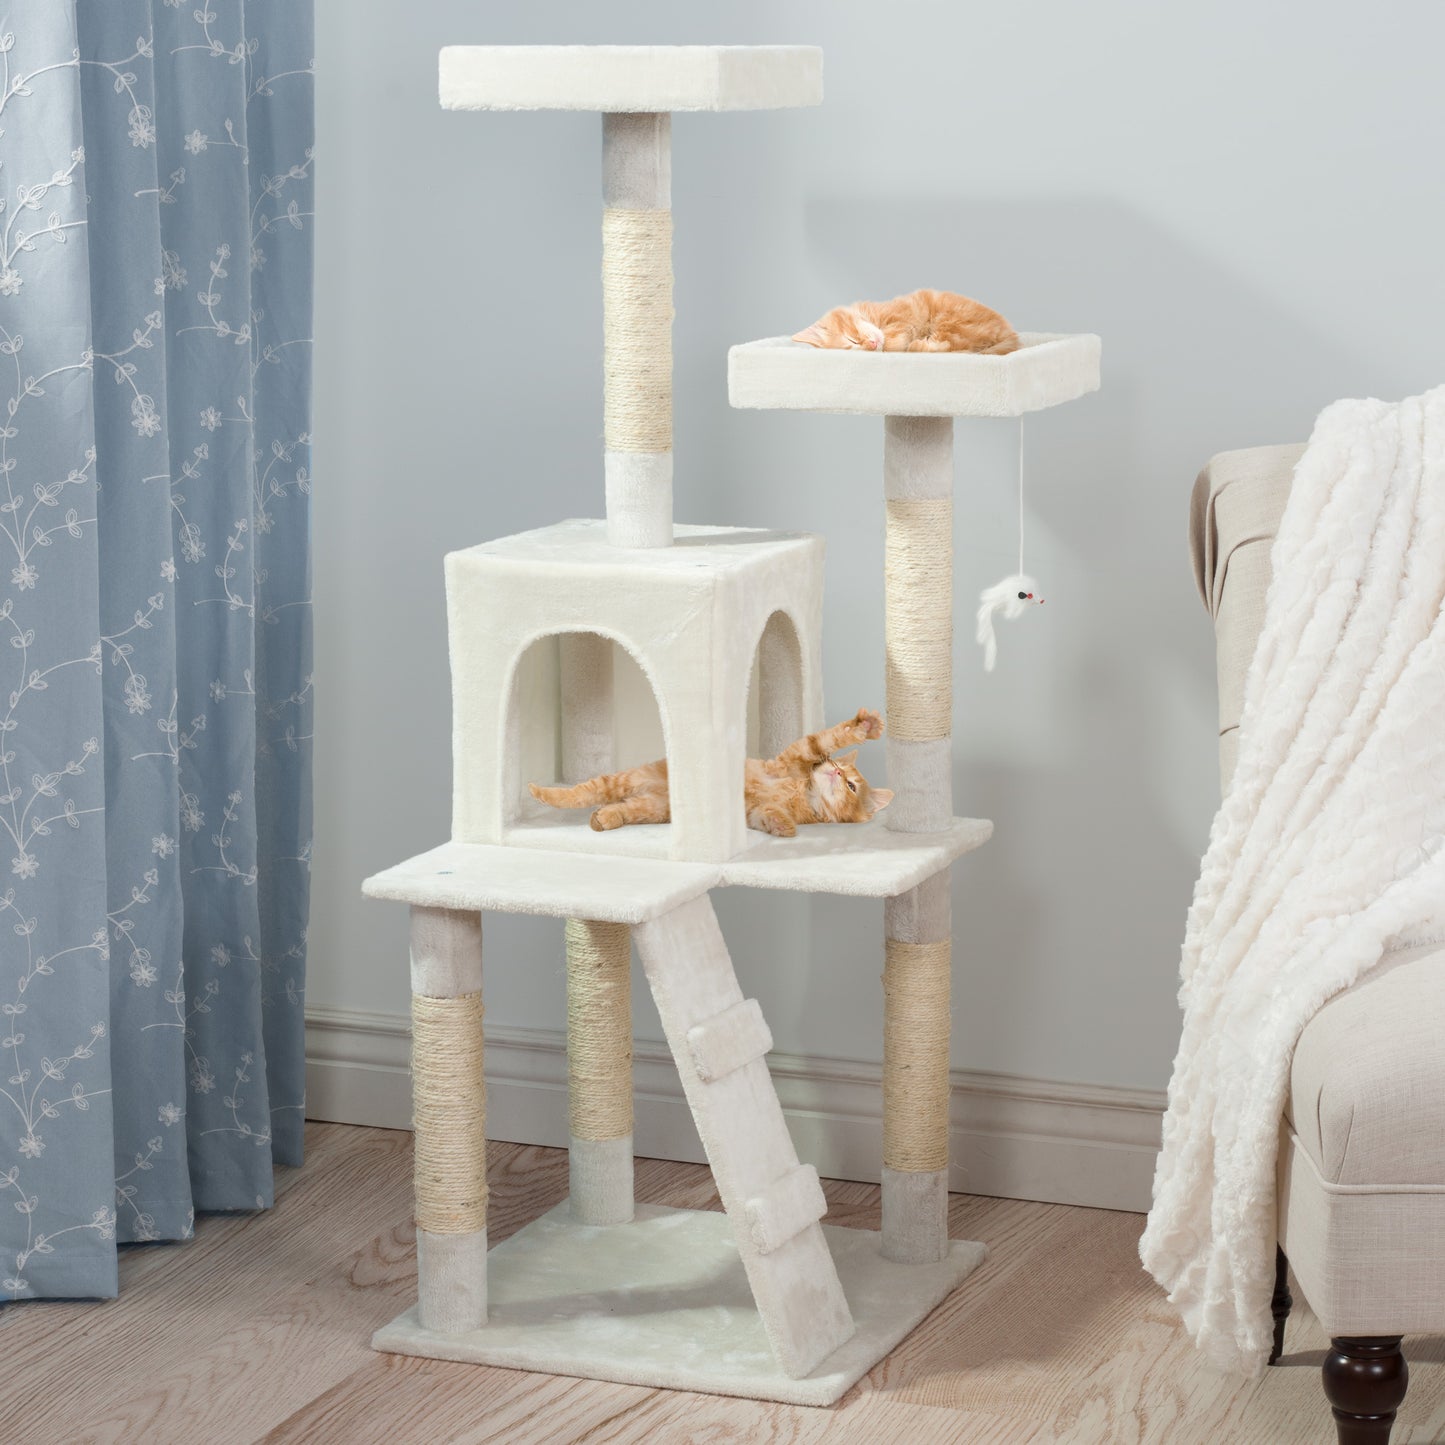 PETMAKER 4FT Cat Tree with Scratch Posts, White